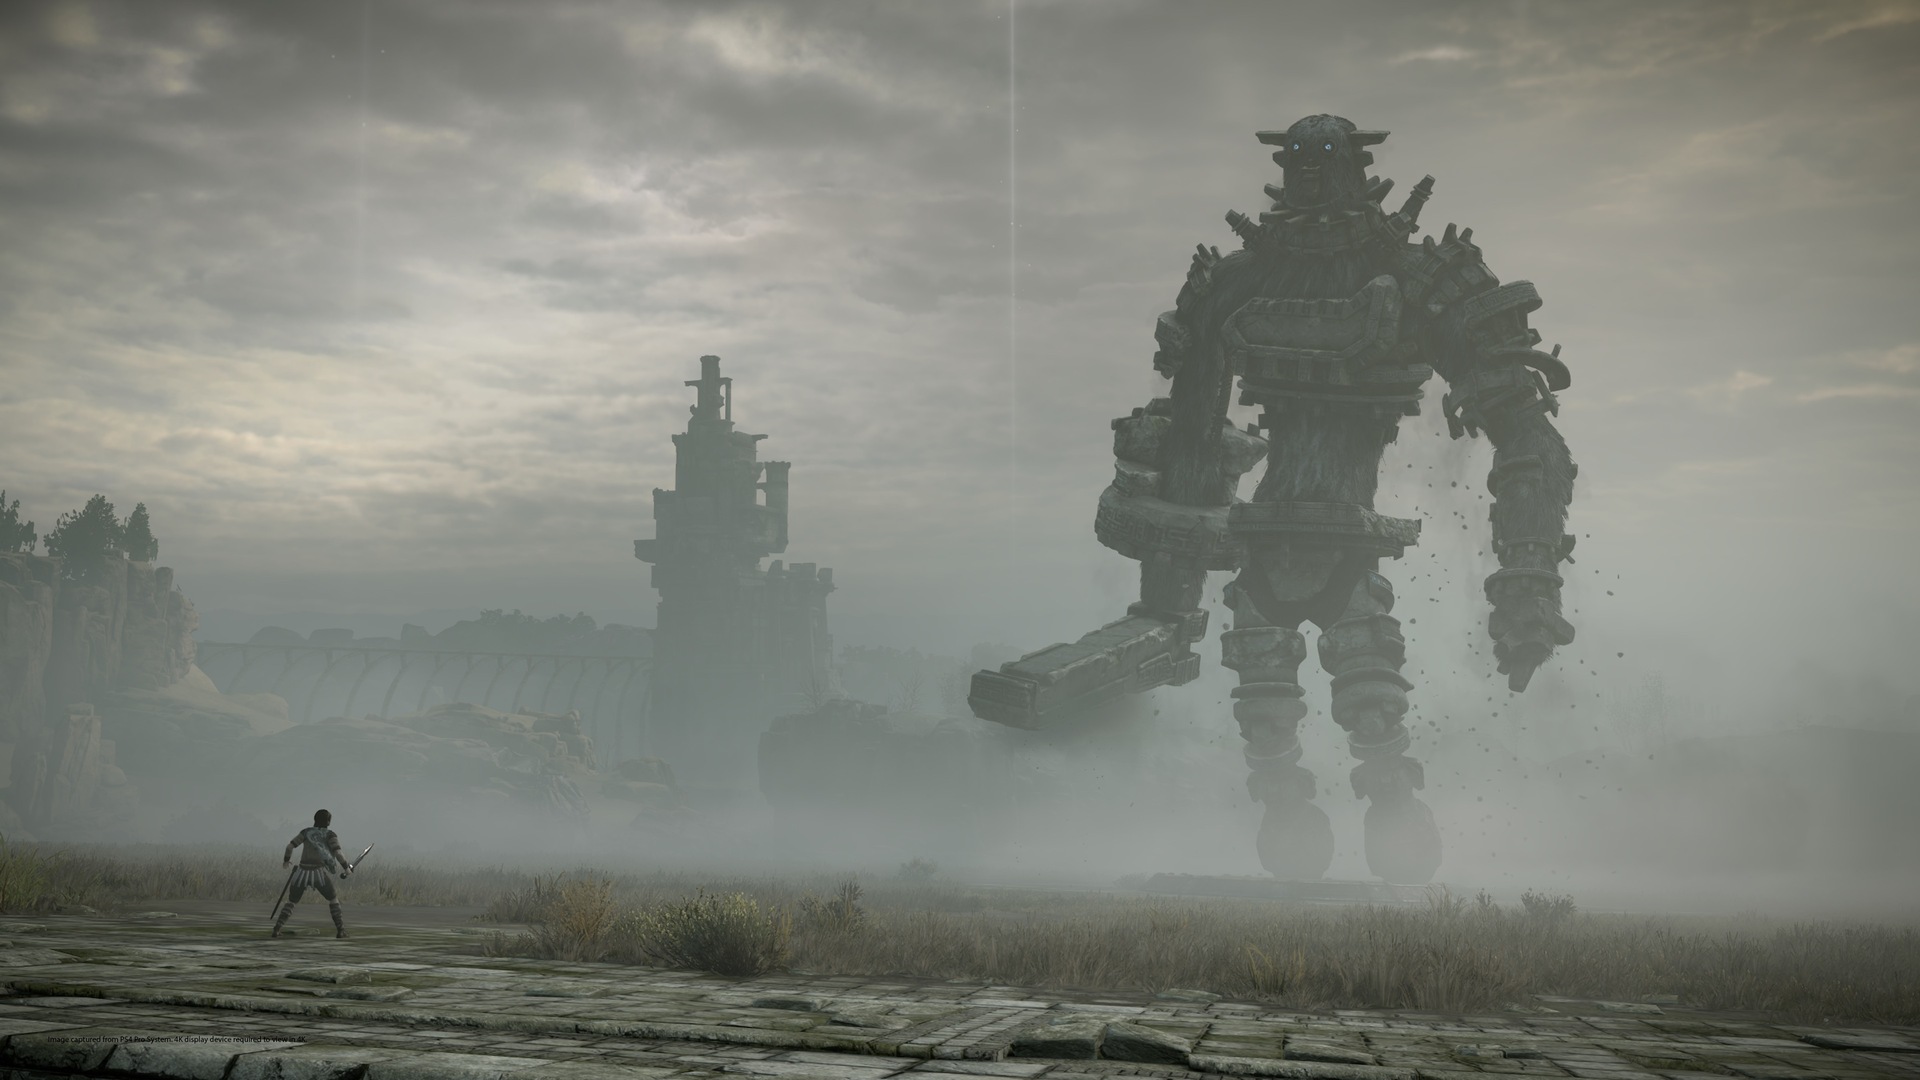 1920x1080 wallpaper Shadow of The Colossus.